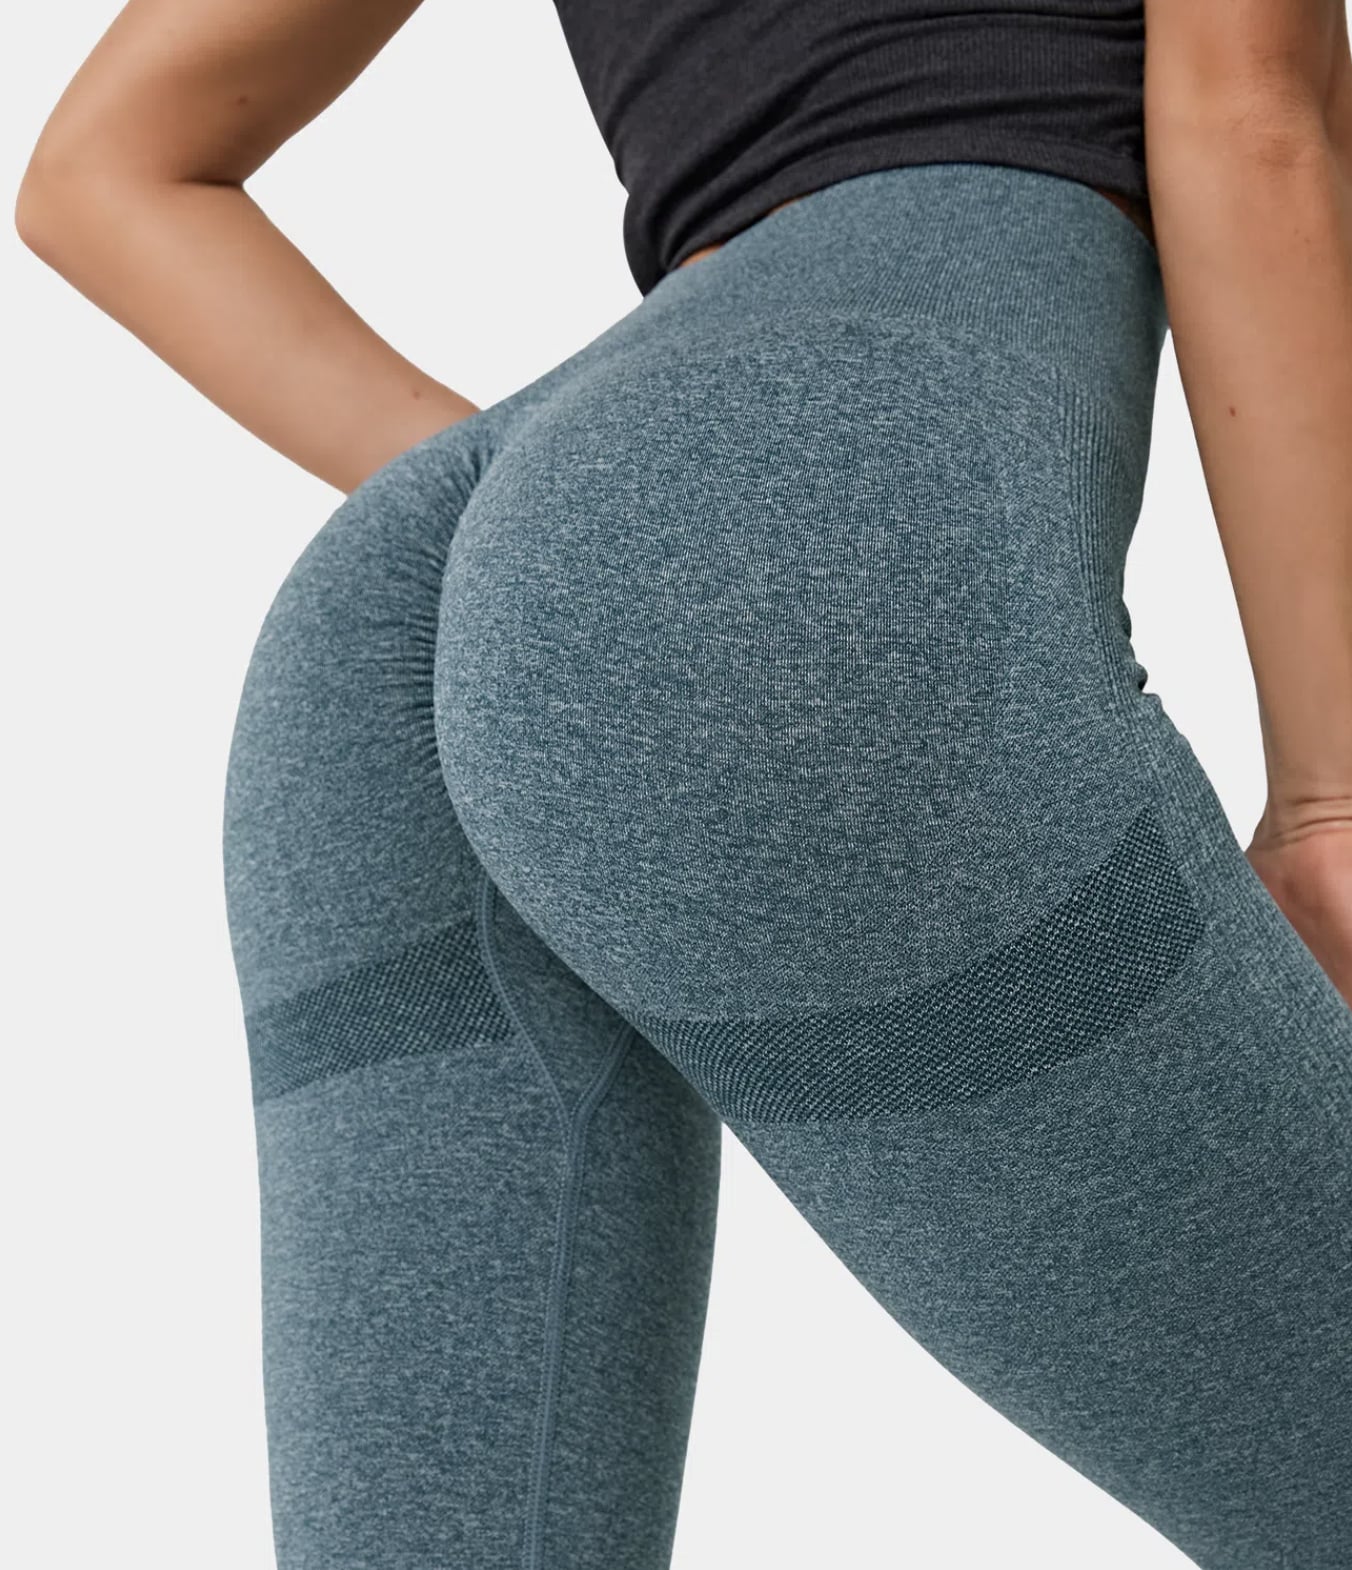 Buy Women's Push Up Leggings Online in India at Best Prices